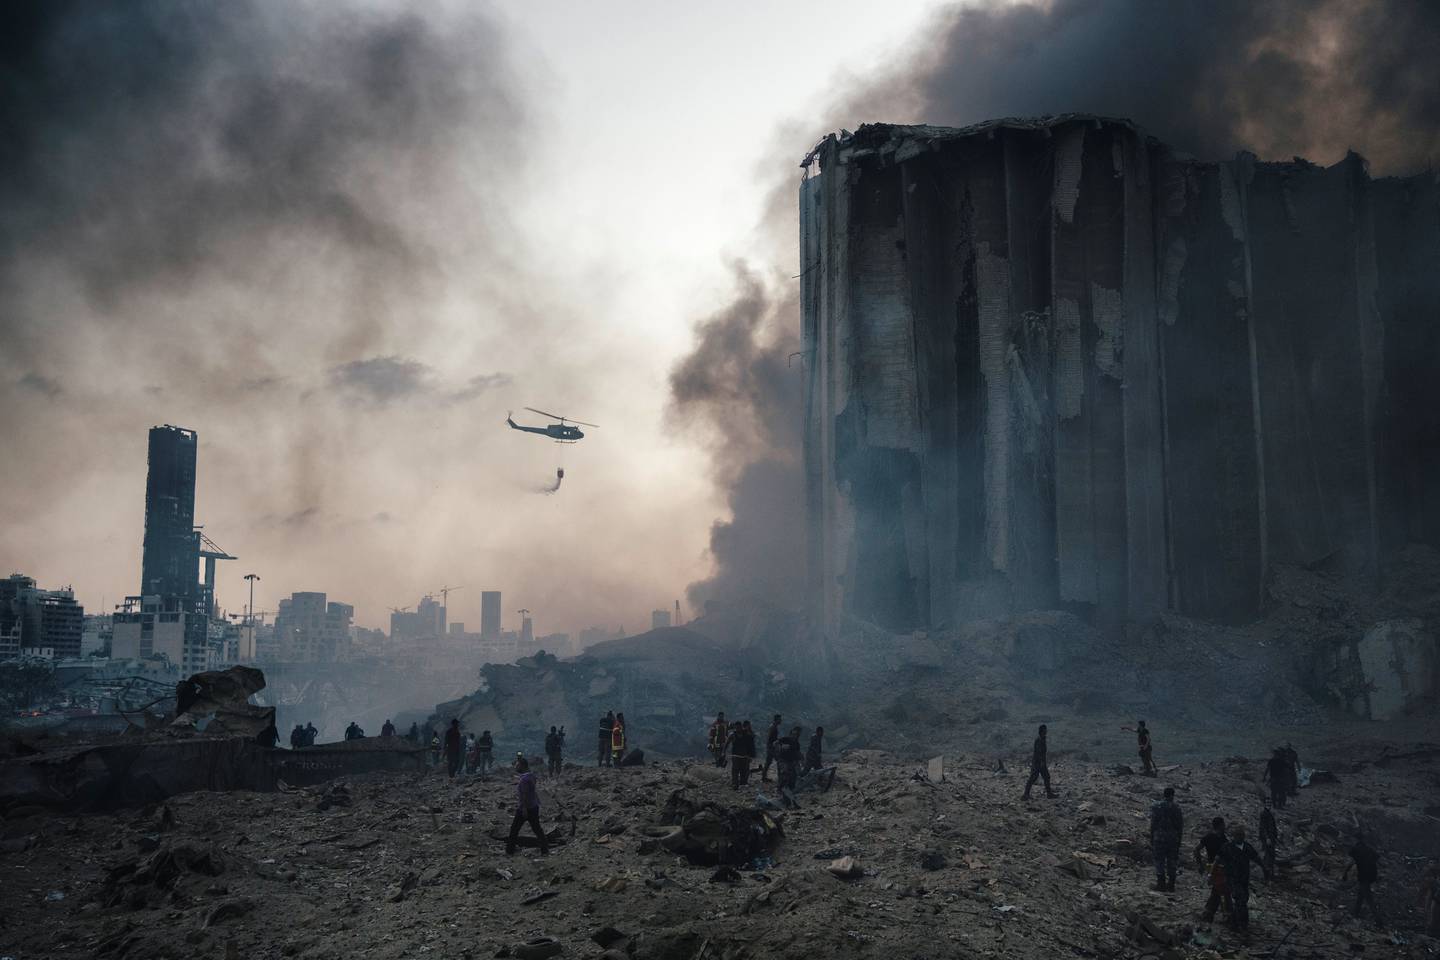 BEIRUT, LEBANON - AUGUST 4:Firefighters work to put out the fires that engulfed the warehouses in the port of Beirut after the explosion. (Photo by Lorenzo Tugnoli/ Contrasto for The Washington Post)